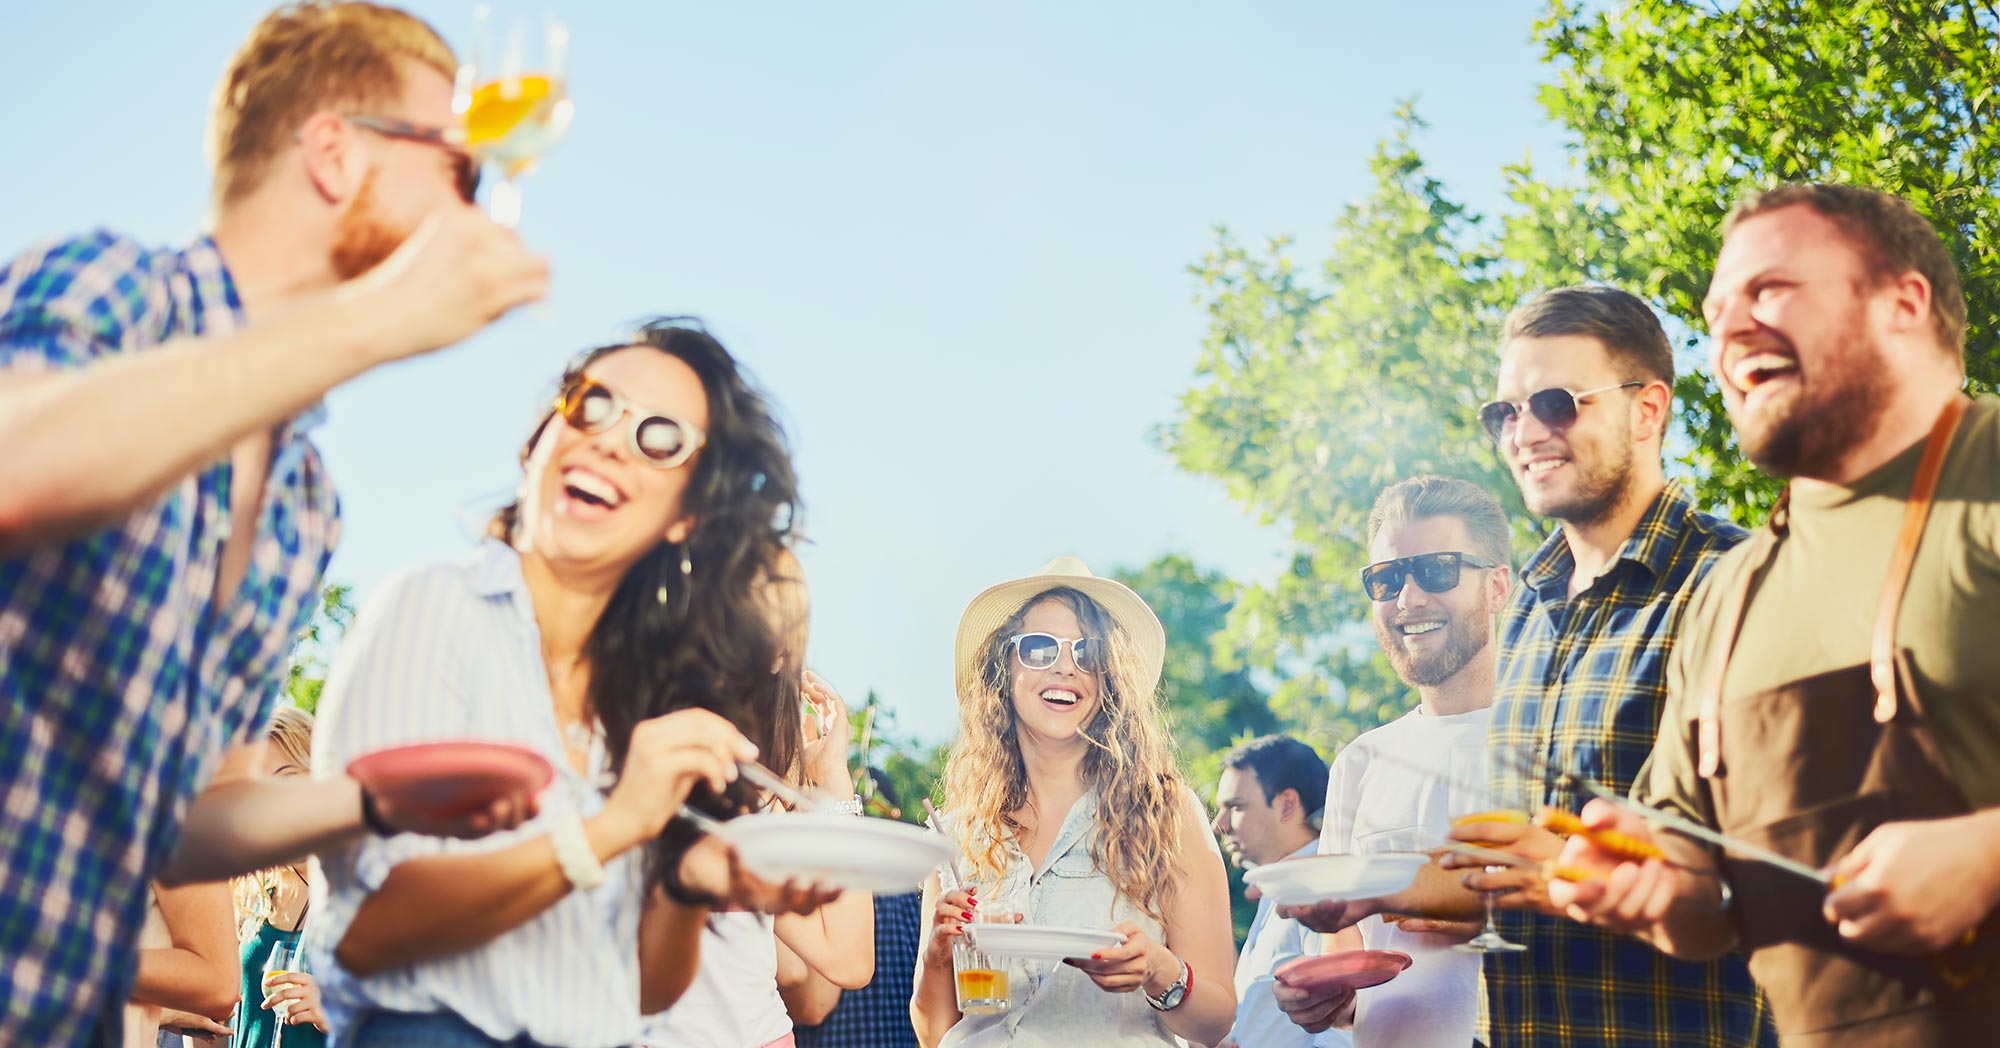 People gathered together drinking alcohol and eating food outside while smiling.